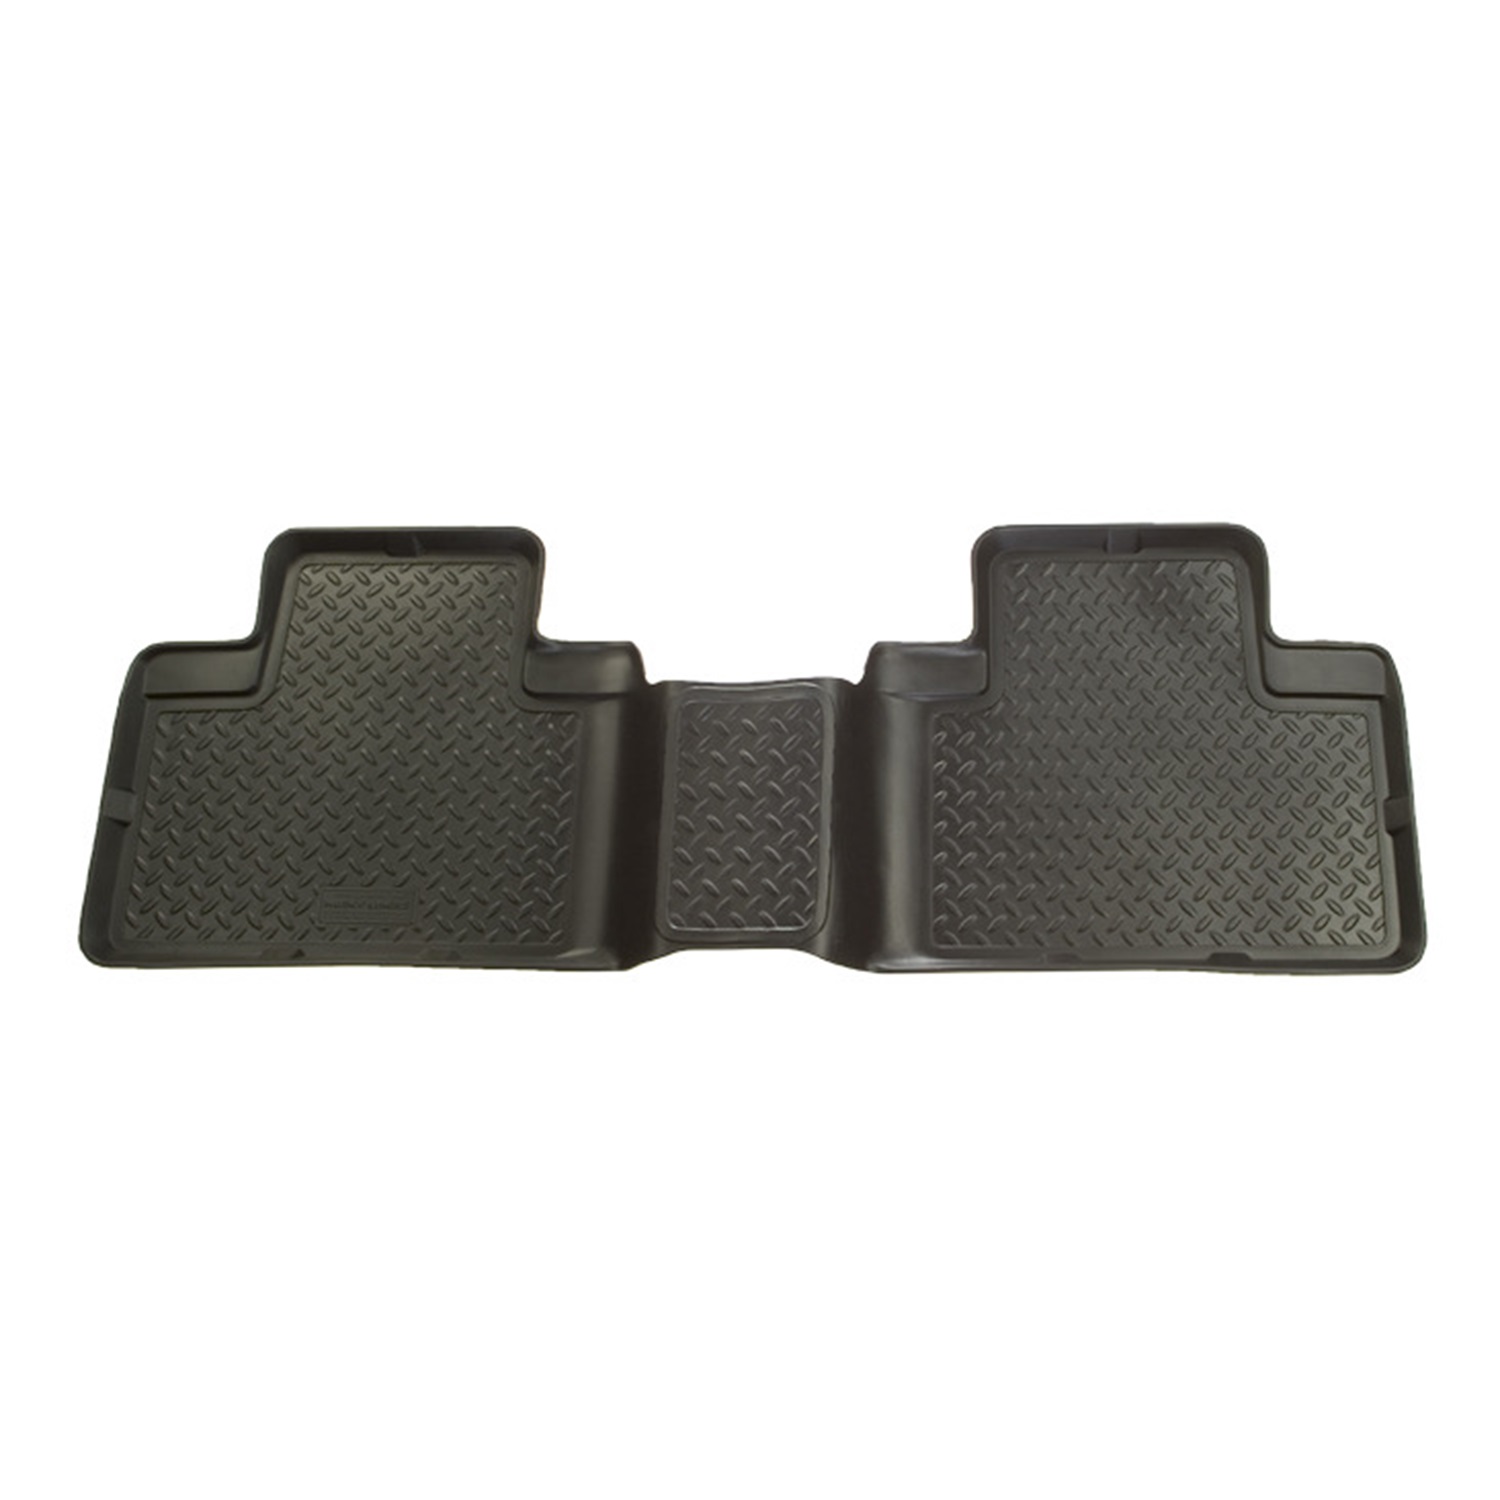 Husky Liners Husky Liners 73541 Classic Style; Floor Liner Fits 07-14 Expedition Navigator